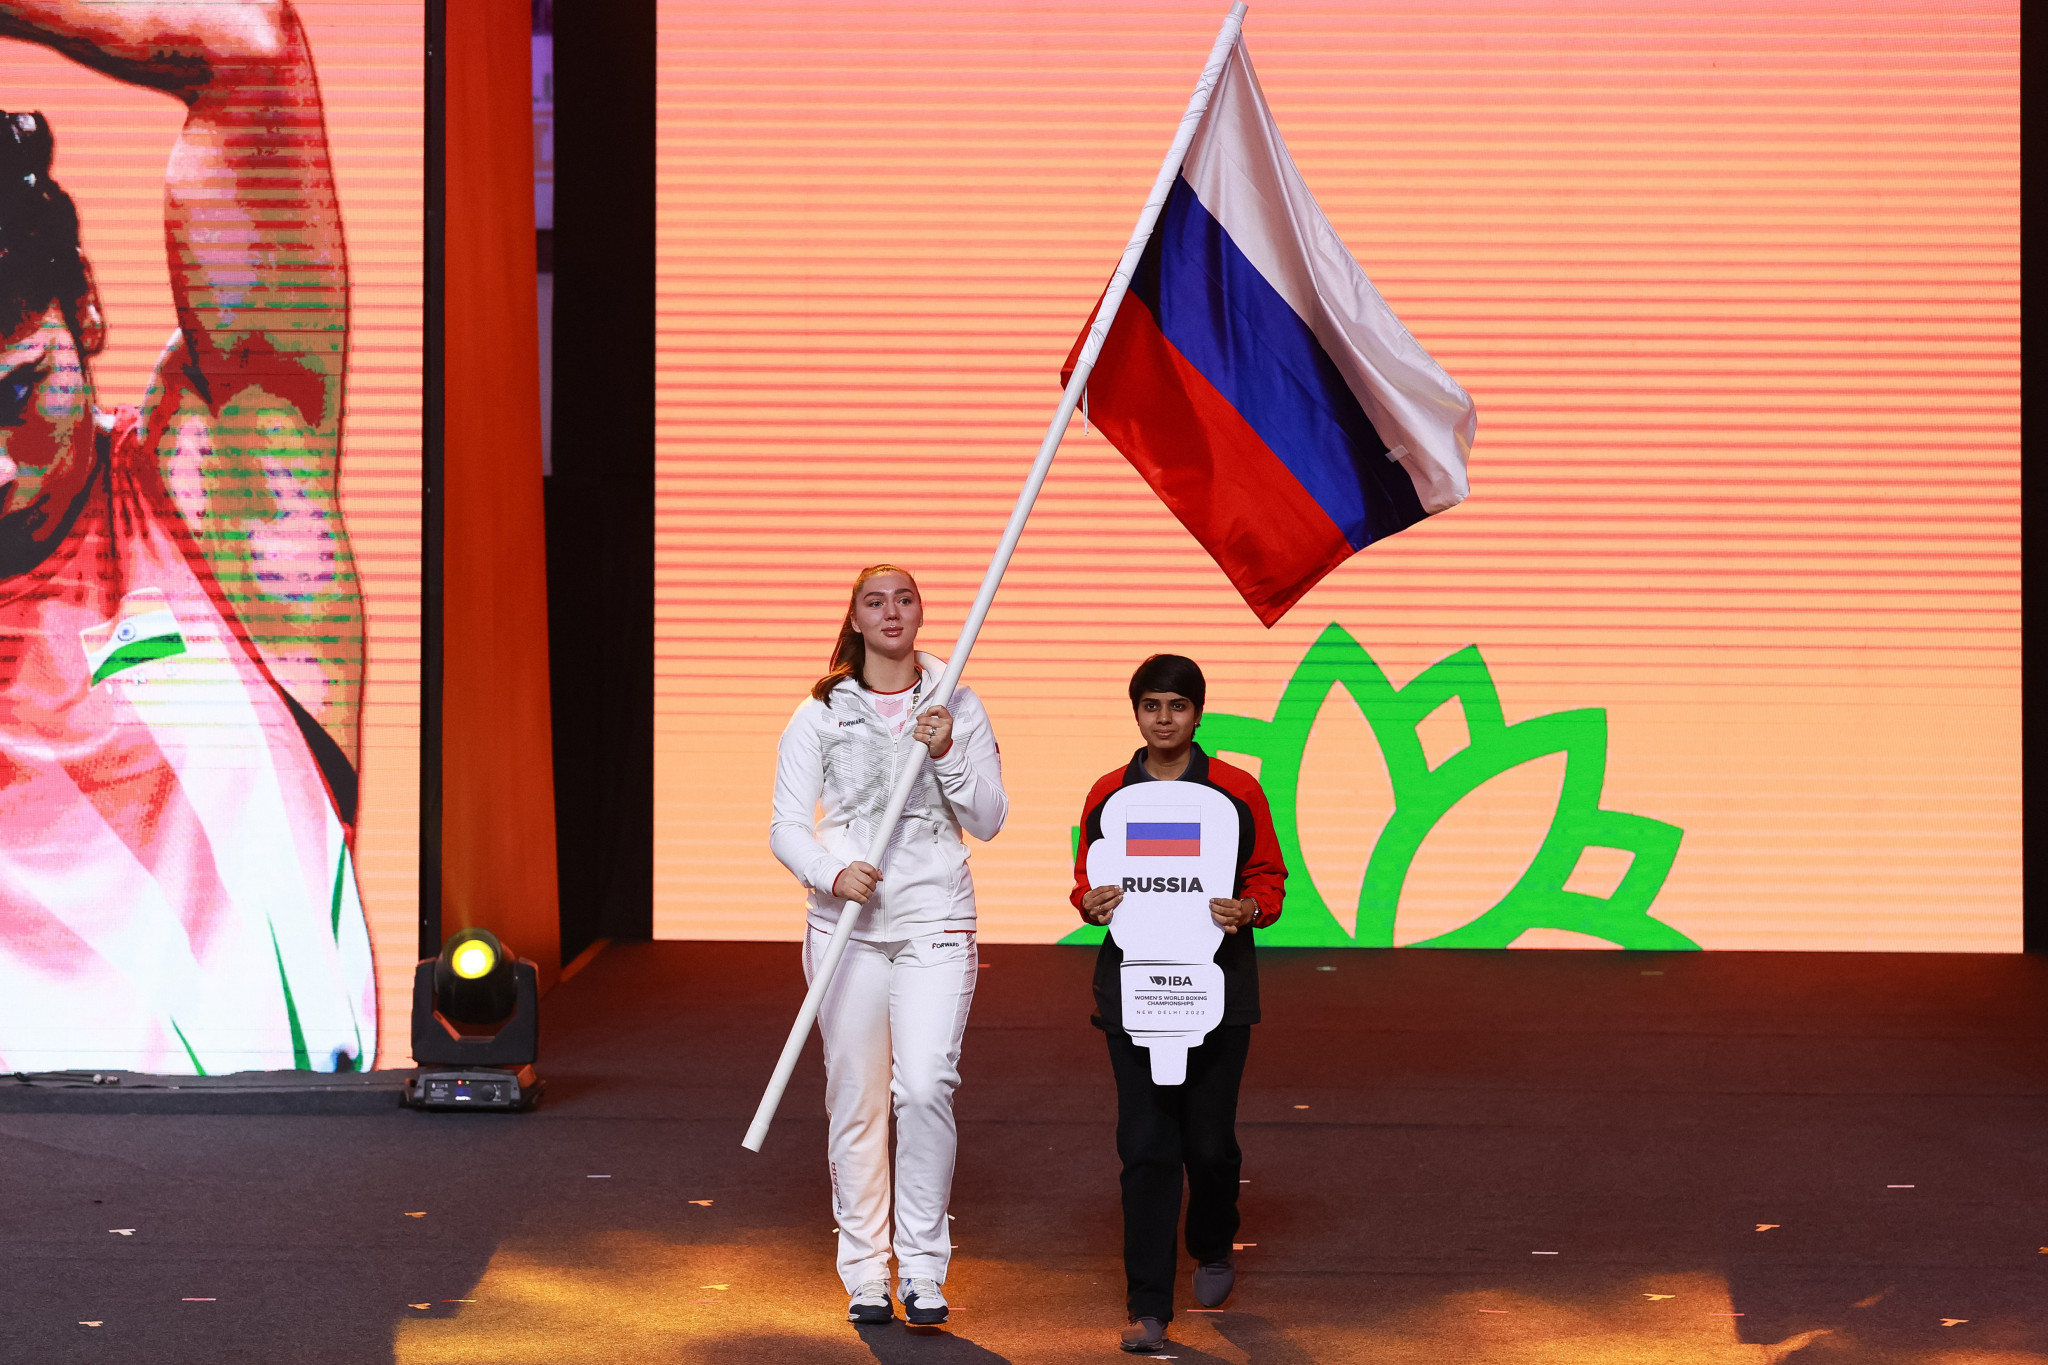 Diana Pyatak, making her debut at the Women’s World Championships, was given the responsibility of carrying the Russian flag which she waved in front of the crowd ©IBA